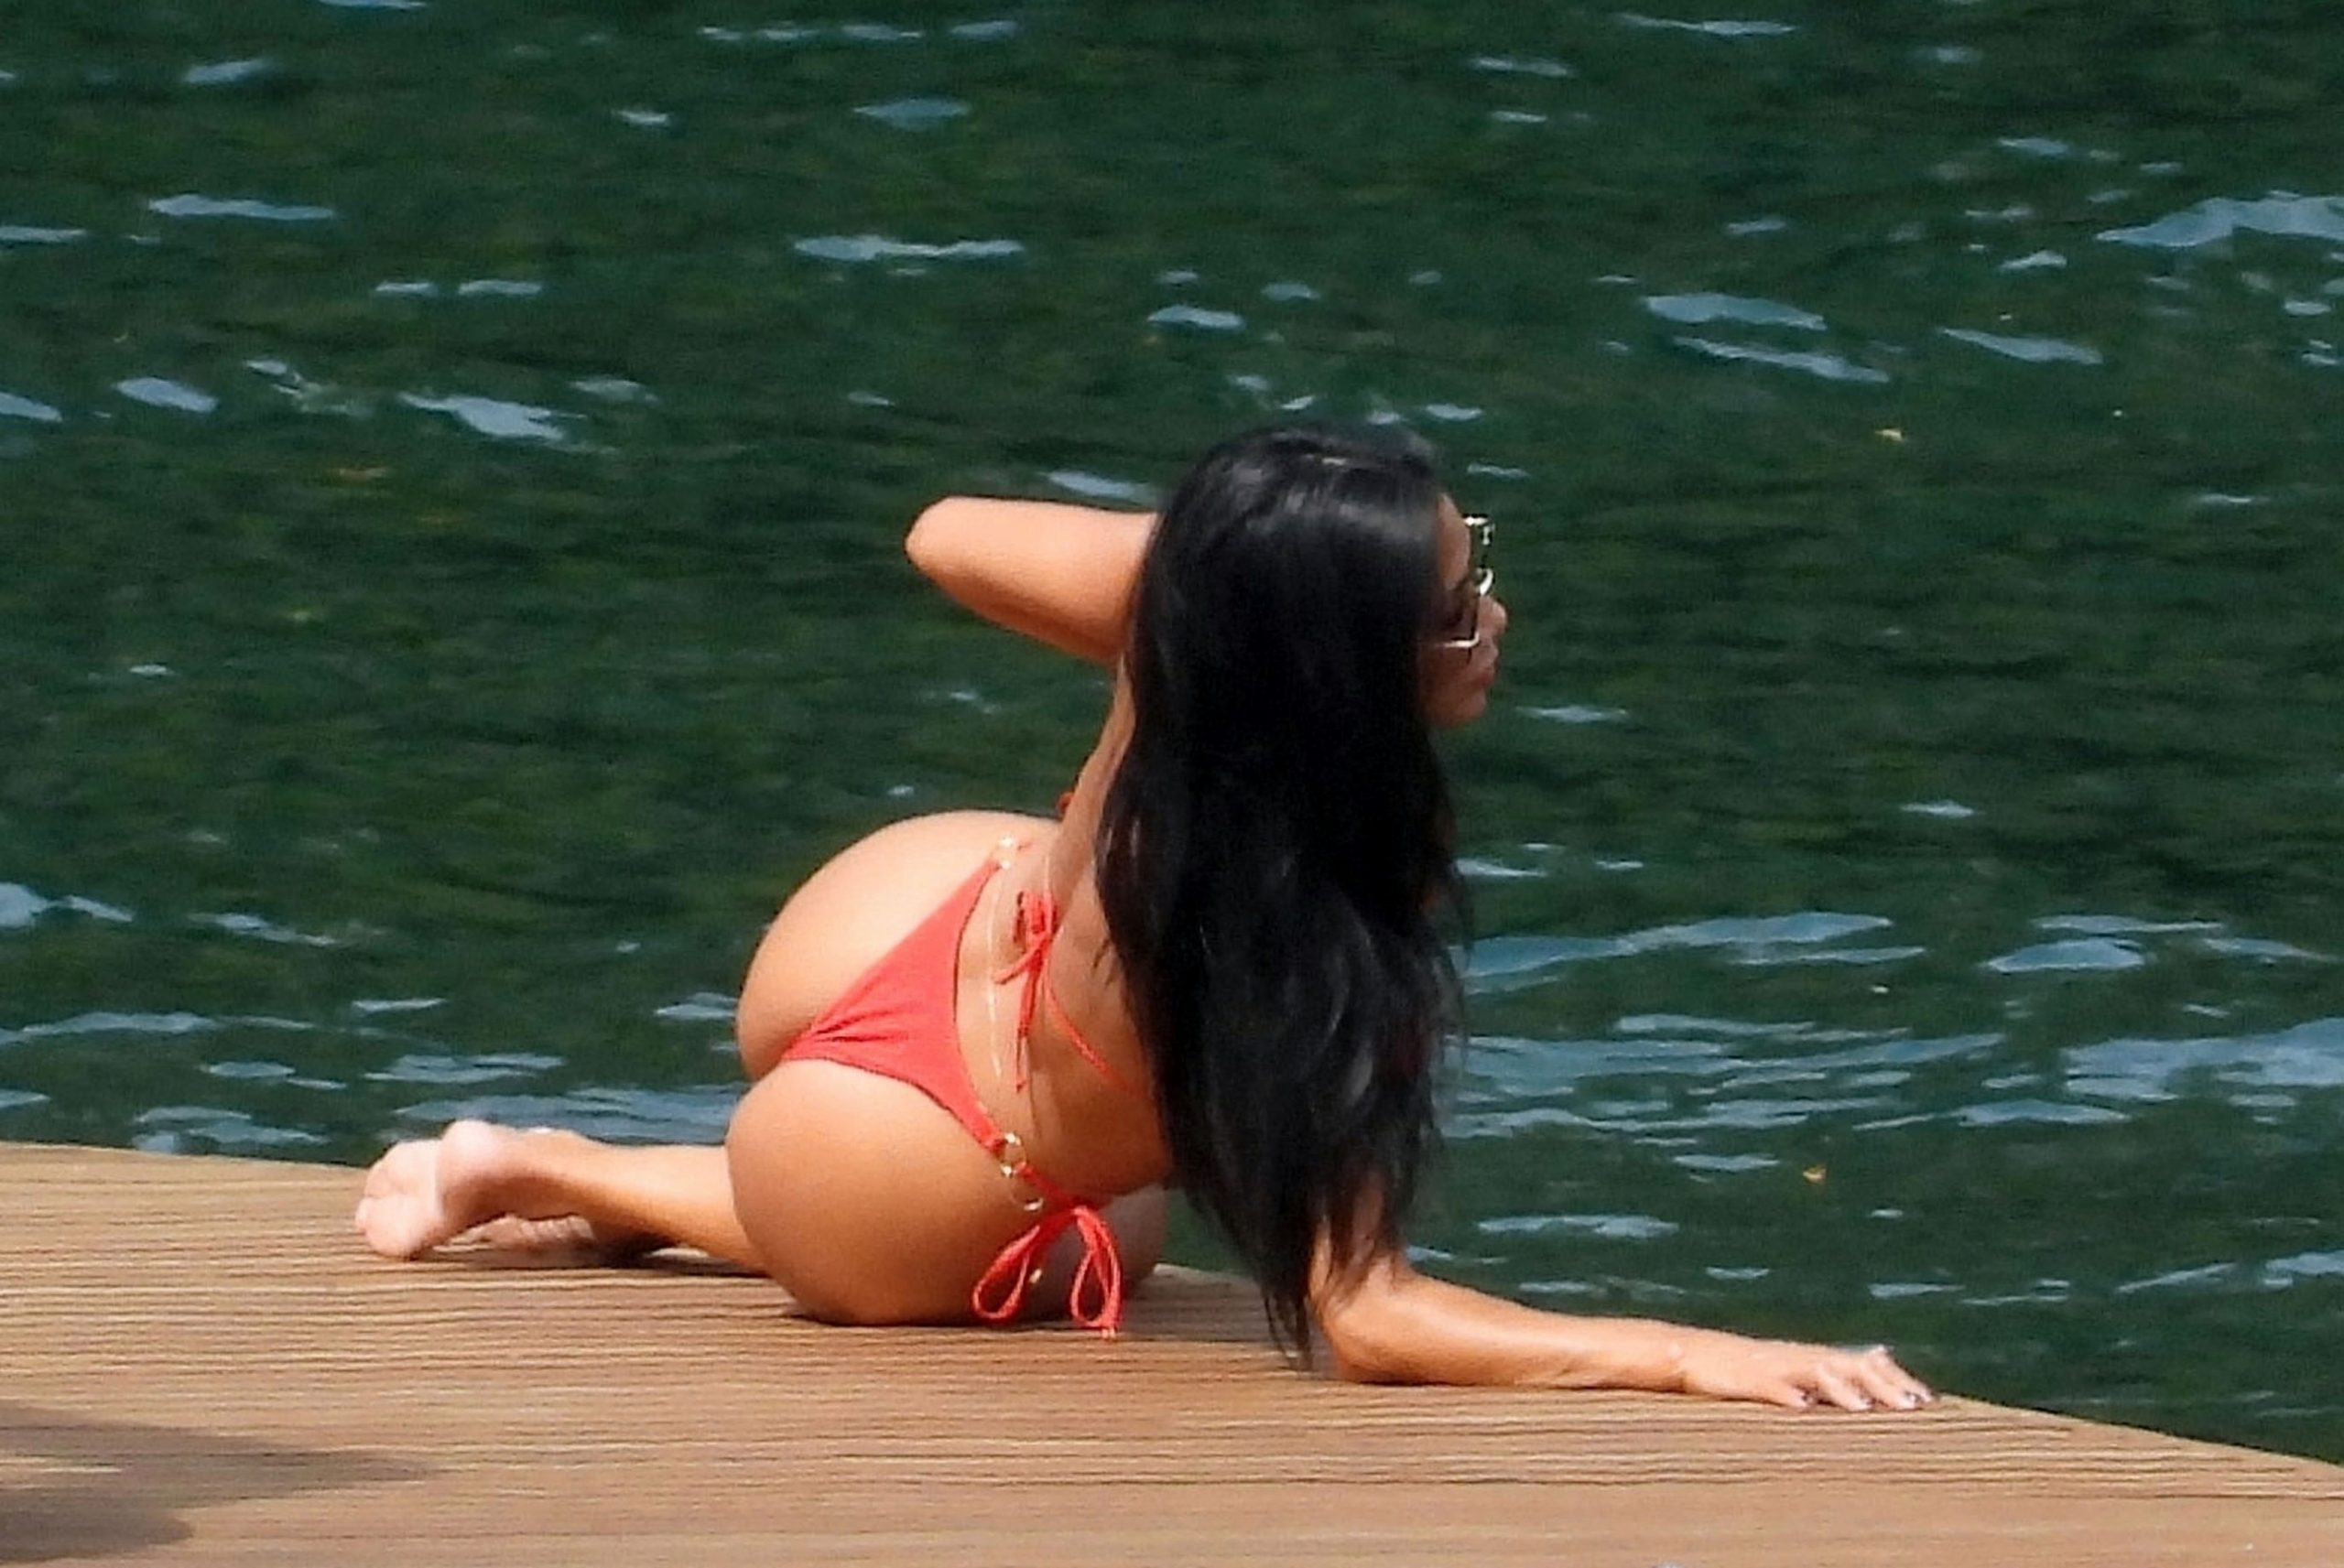 Wild-Hearted Celebrity Nicole Scherzinger Jumping Around and Being Sexy for the Camera